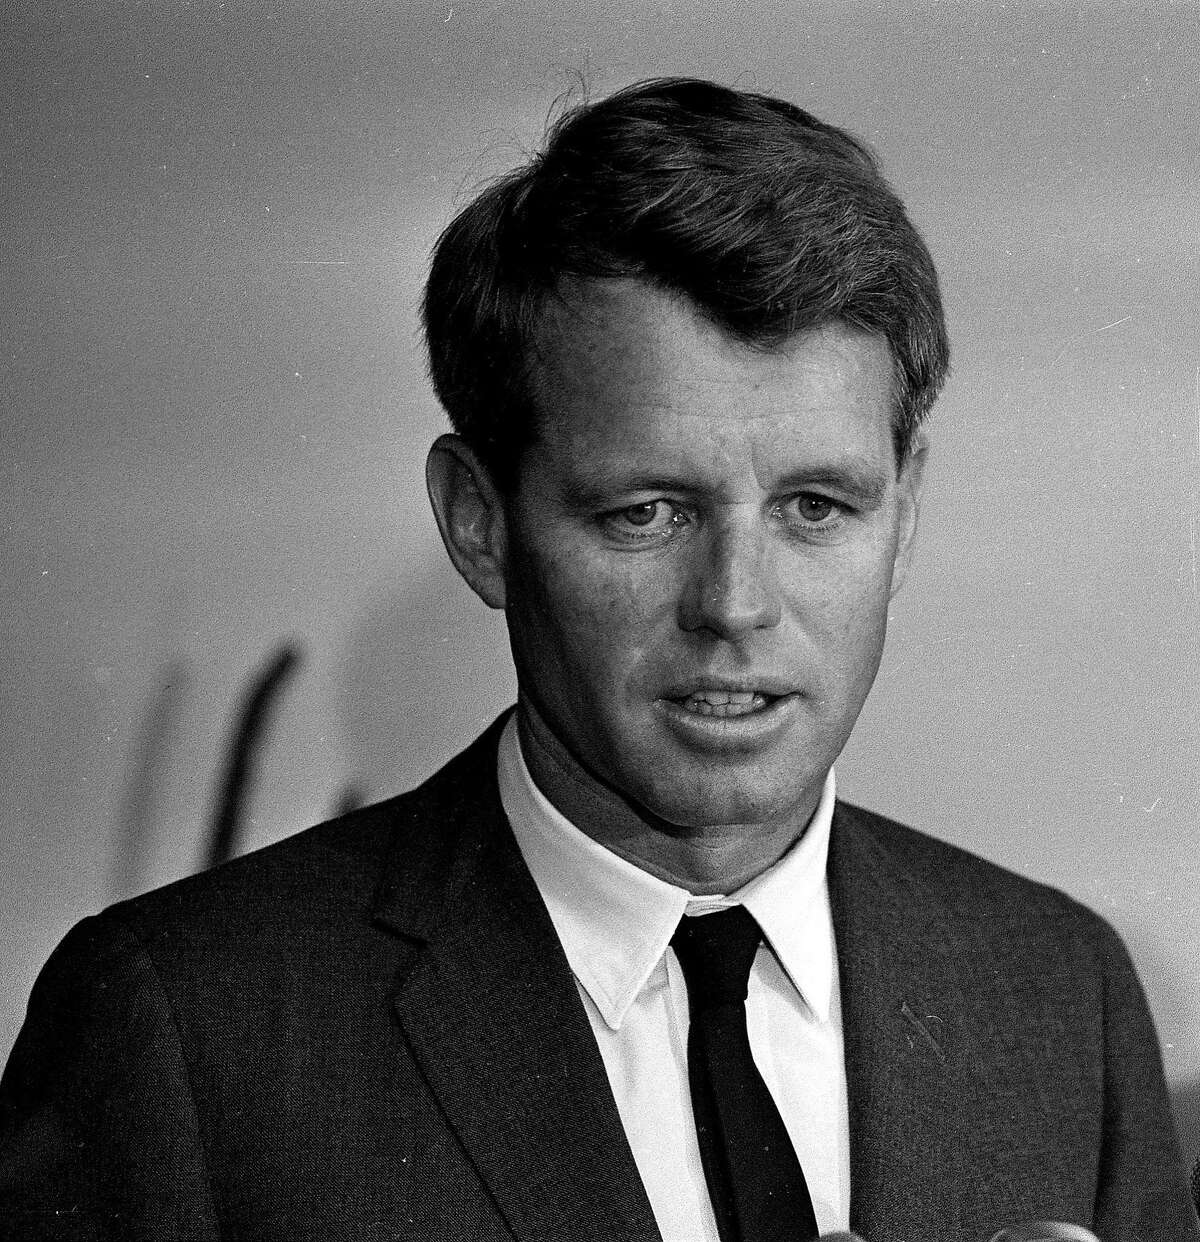 ** FILE ** U.S. Attorney Gen. Robert F. Kennedy is photographed in his office in Washington, D.C. on Aug. 28, 1964. The widow and a daughter of the late Robert F. Kennedy give a thumbs-up for "Bobby," an ensemble drama about the 1968 Kennedy assassination directed by Emilio Estevez and set for release next month.(AP File Photo)